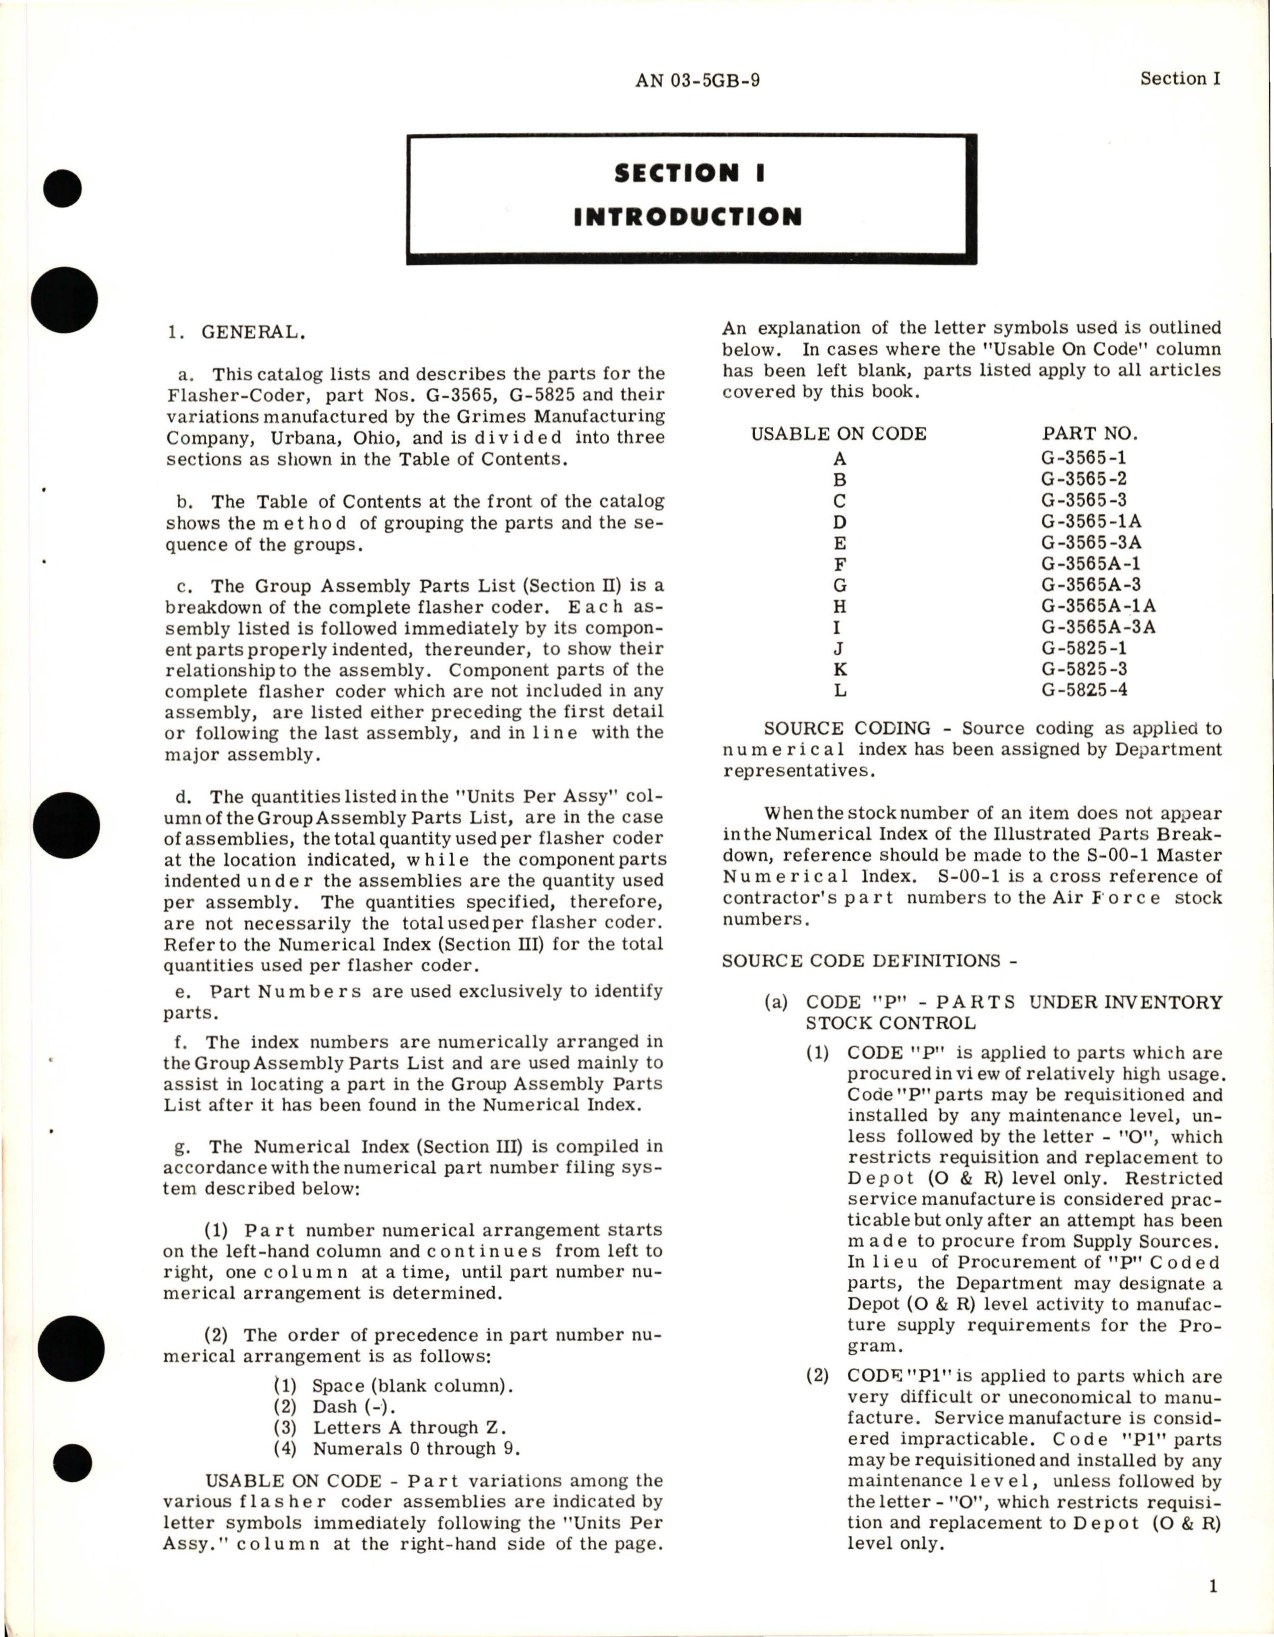 Sample page 5 from AirCorps Library document: Illustrated Parts Breadown for Flasher Coder Assembly 